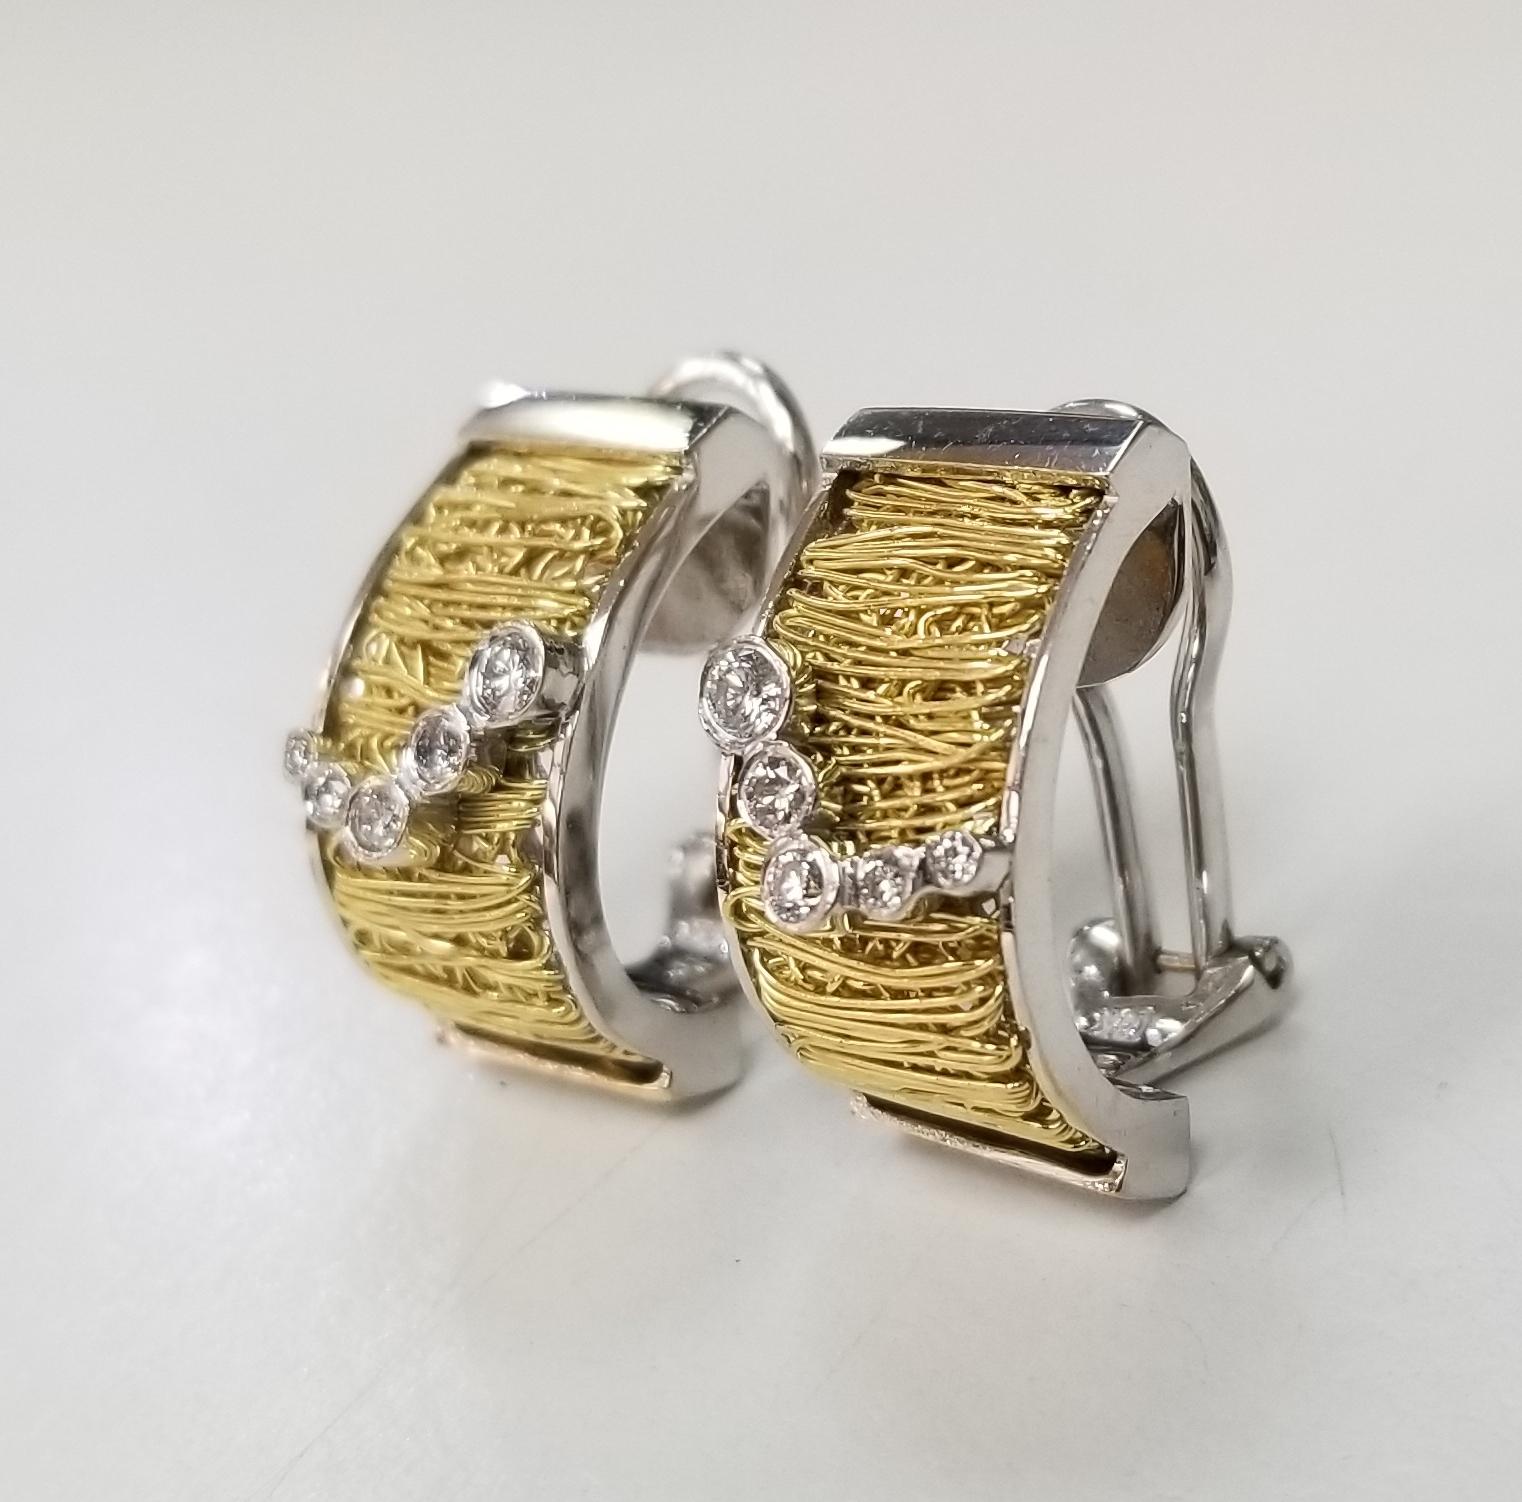 Pasquale Bruni 18k white and yellow gold wire diamond earrings with a right and left earring.
    
Specifications:
    main stone: ROUND CUT DIAMONDS
    diamonds: 10 PCS
    carat total weight: APPROXIMATELY 0.30CTW
    color: F
    clarity: VS
   